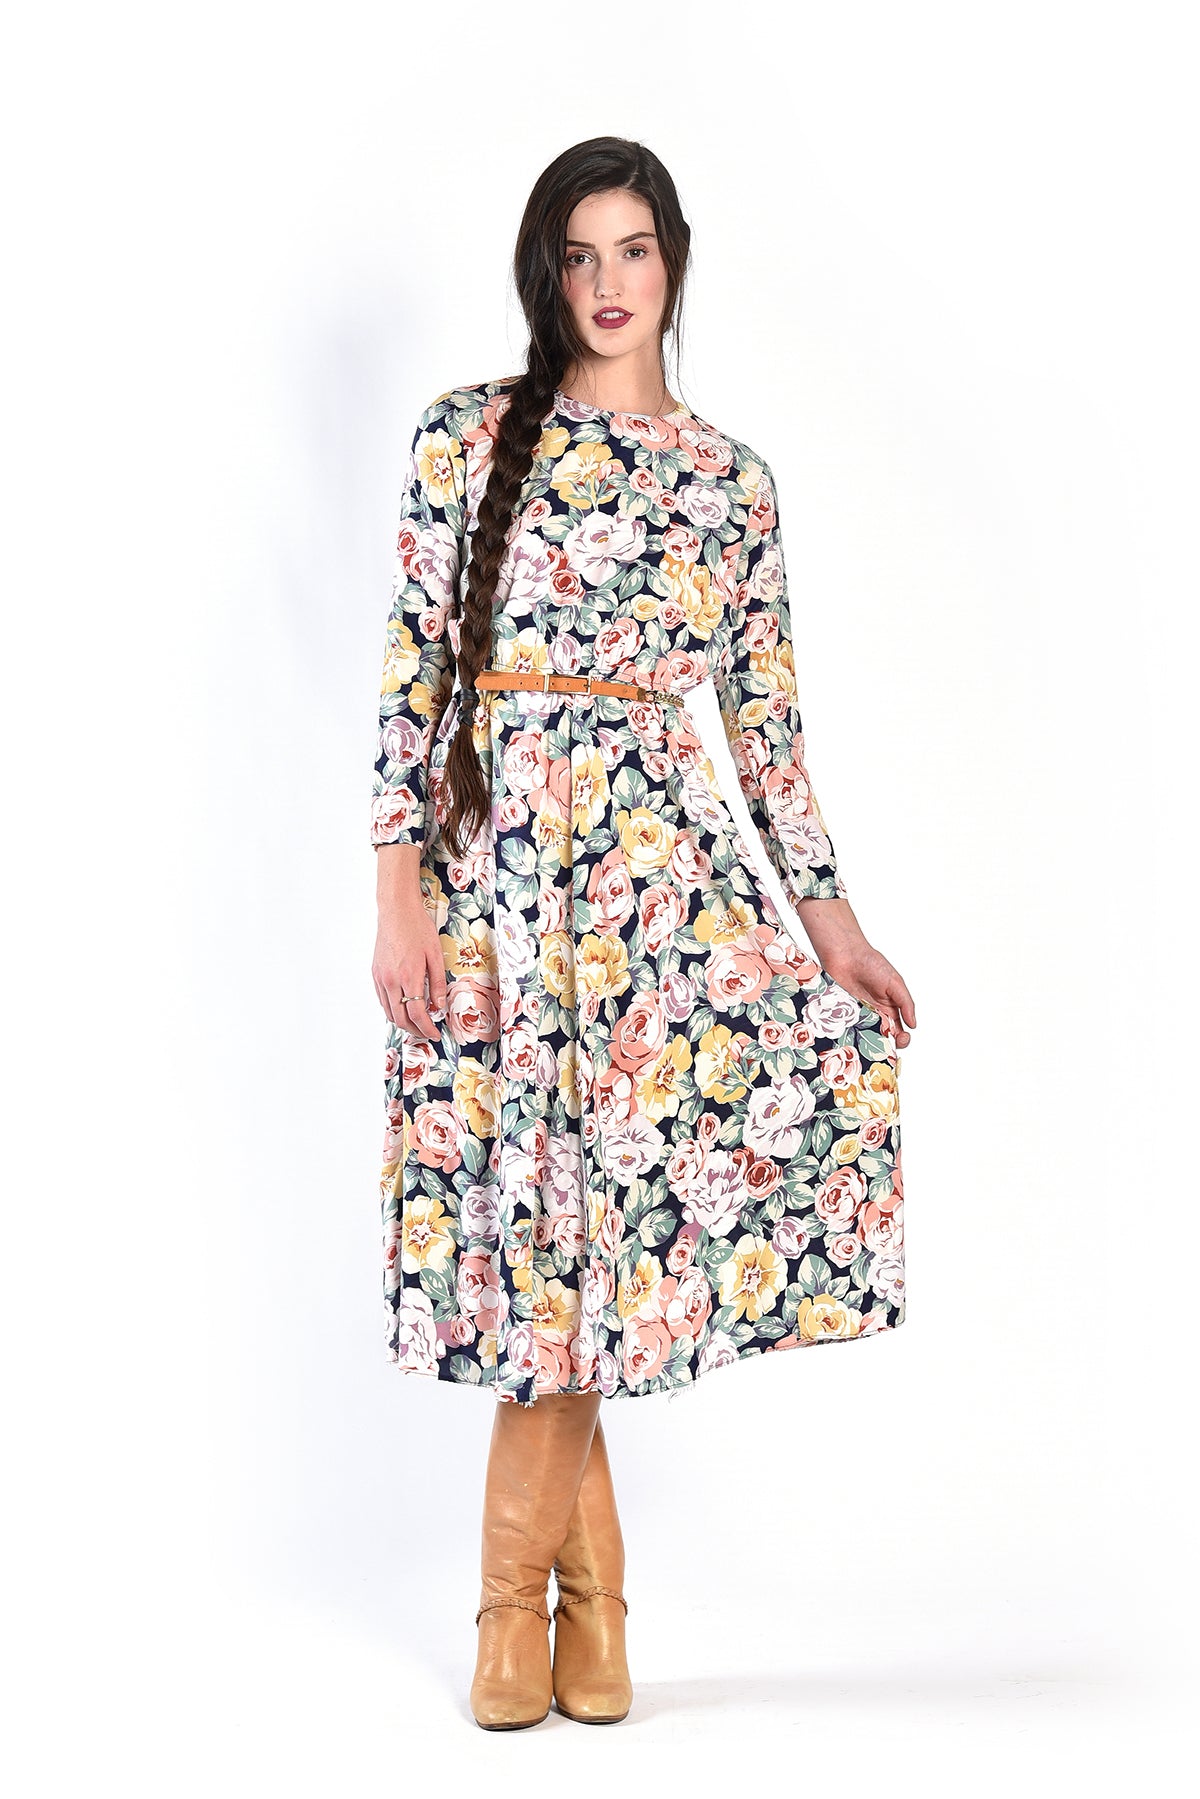 Elenore Floral Dress with Buttons